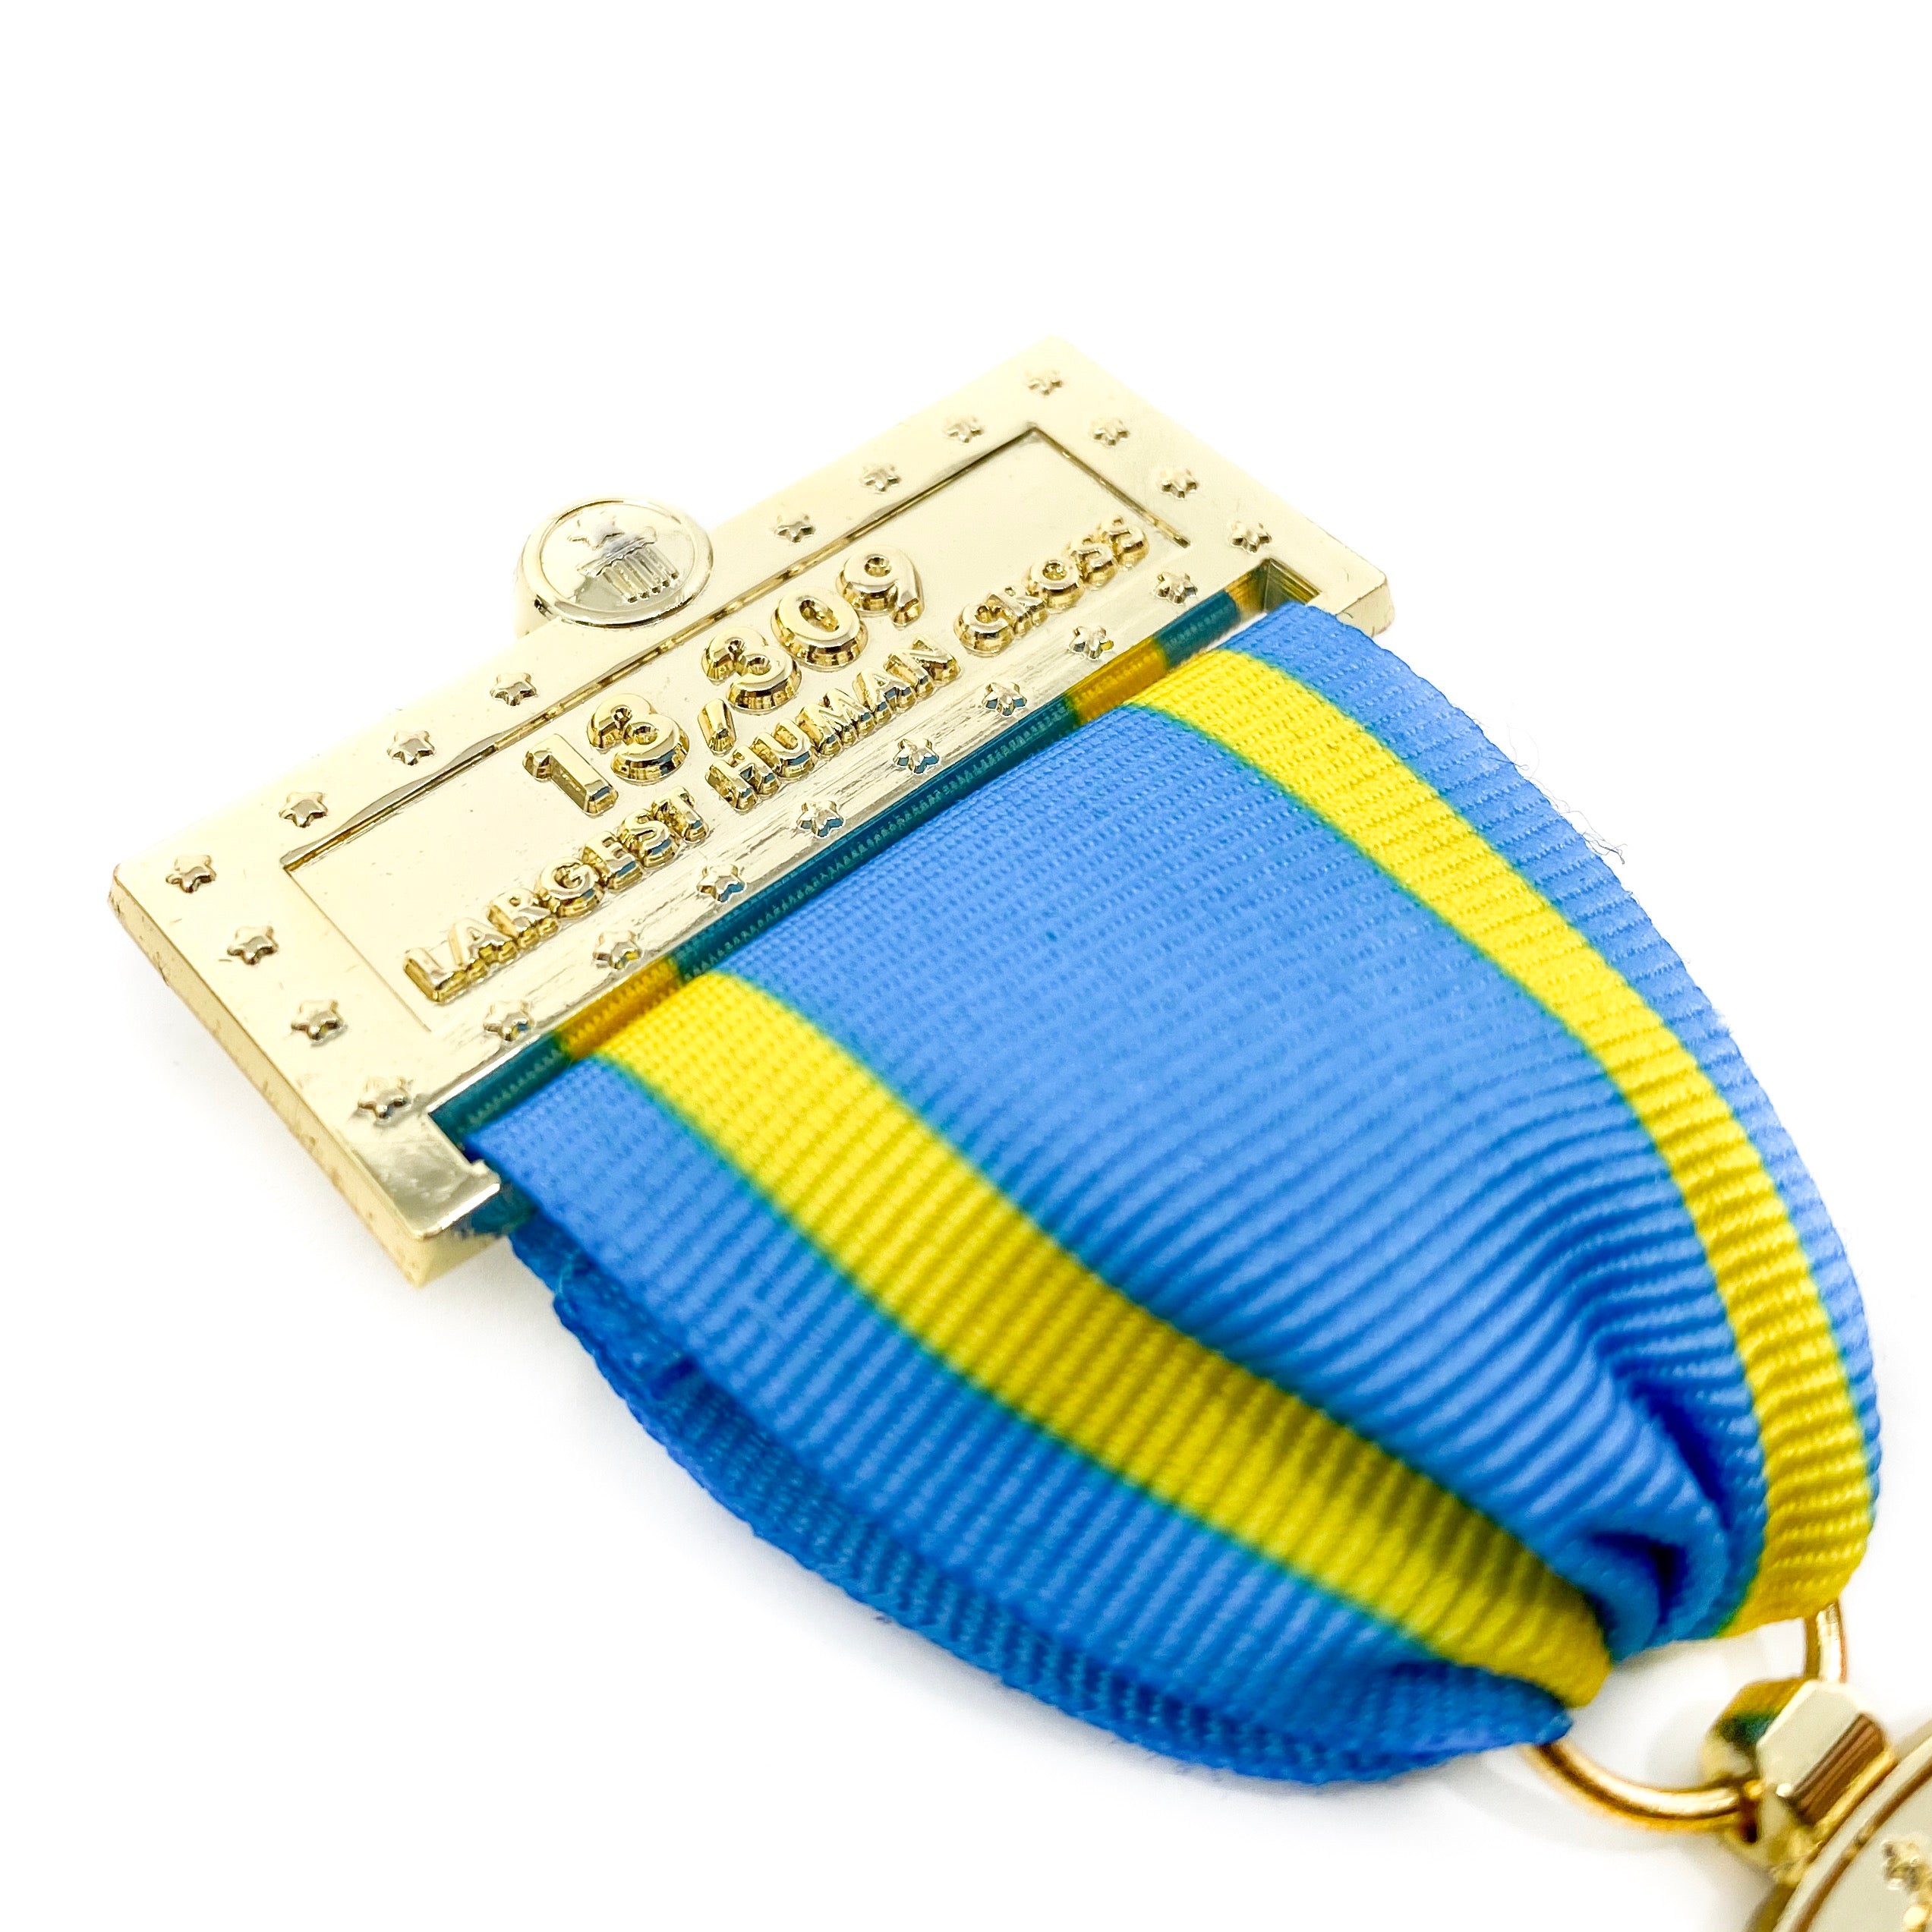 Largest Human Cross World Record Medal - Pinfinder Club